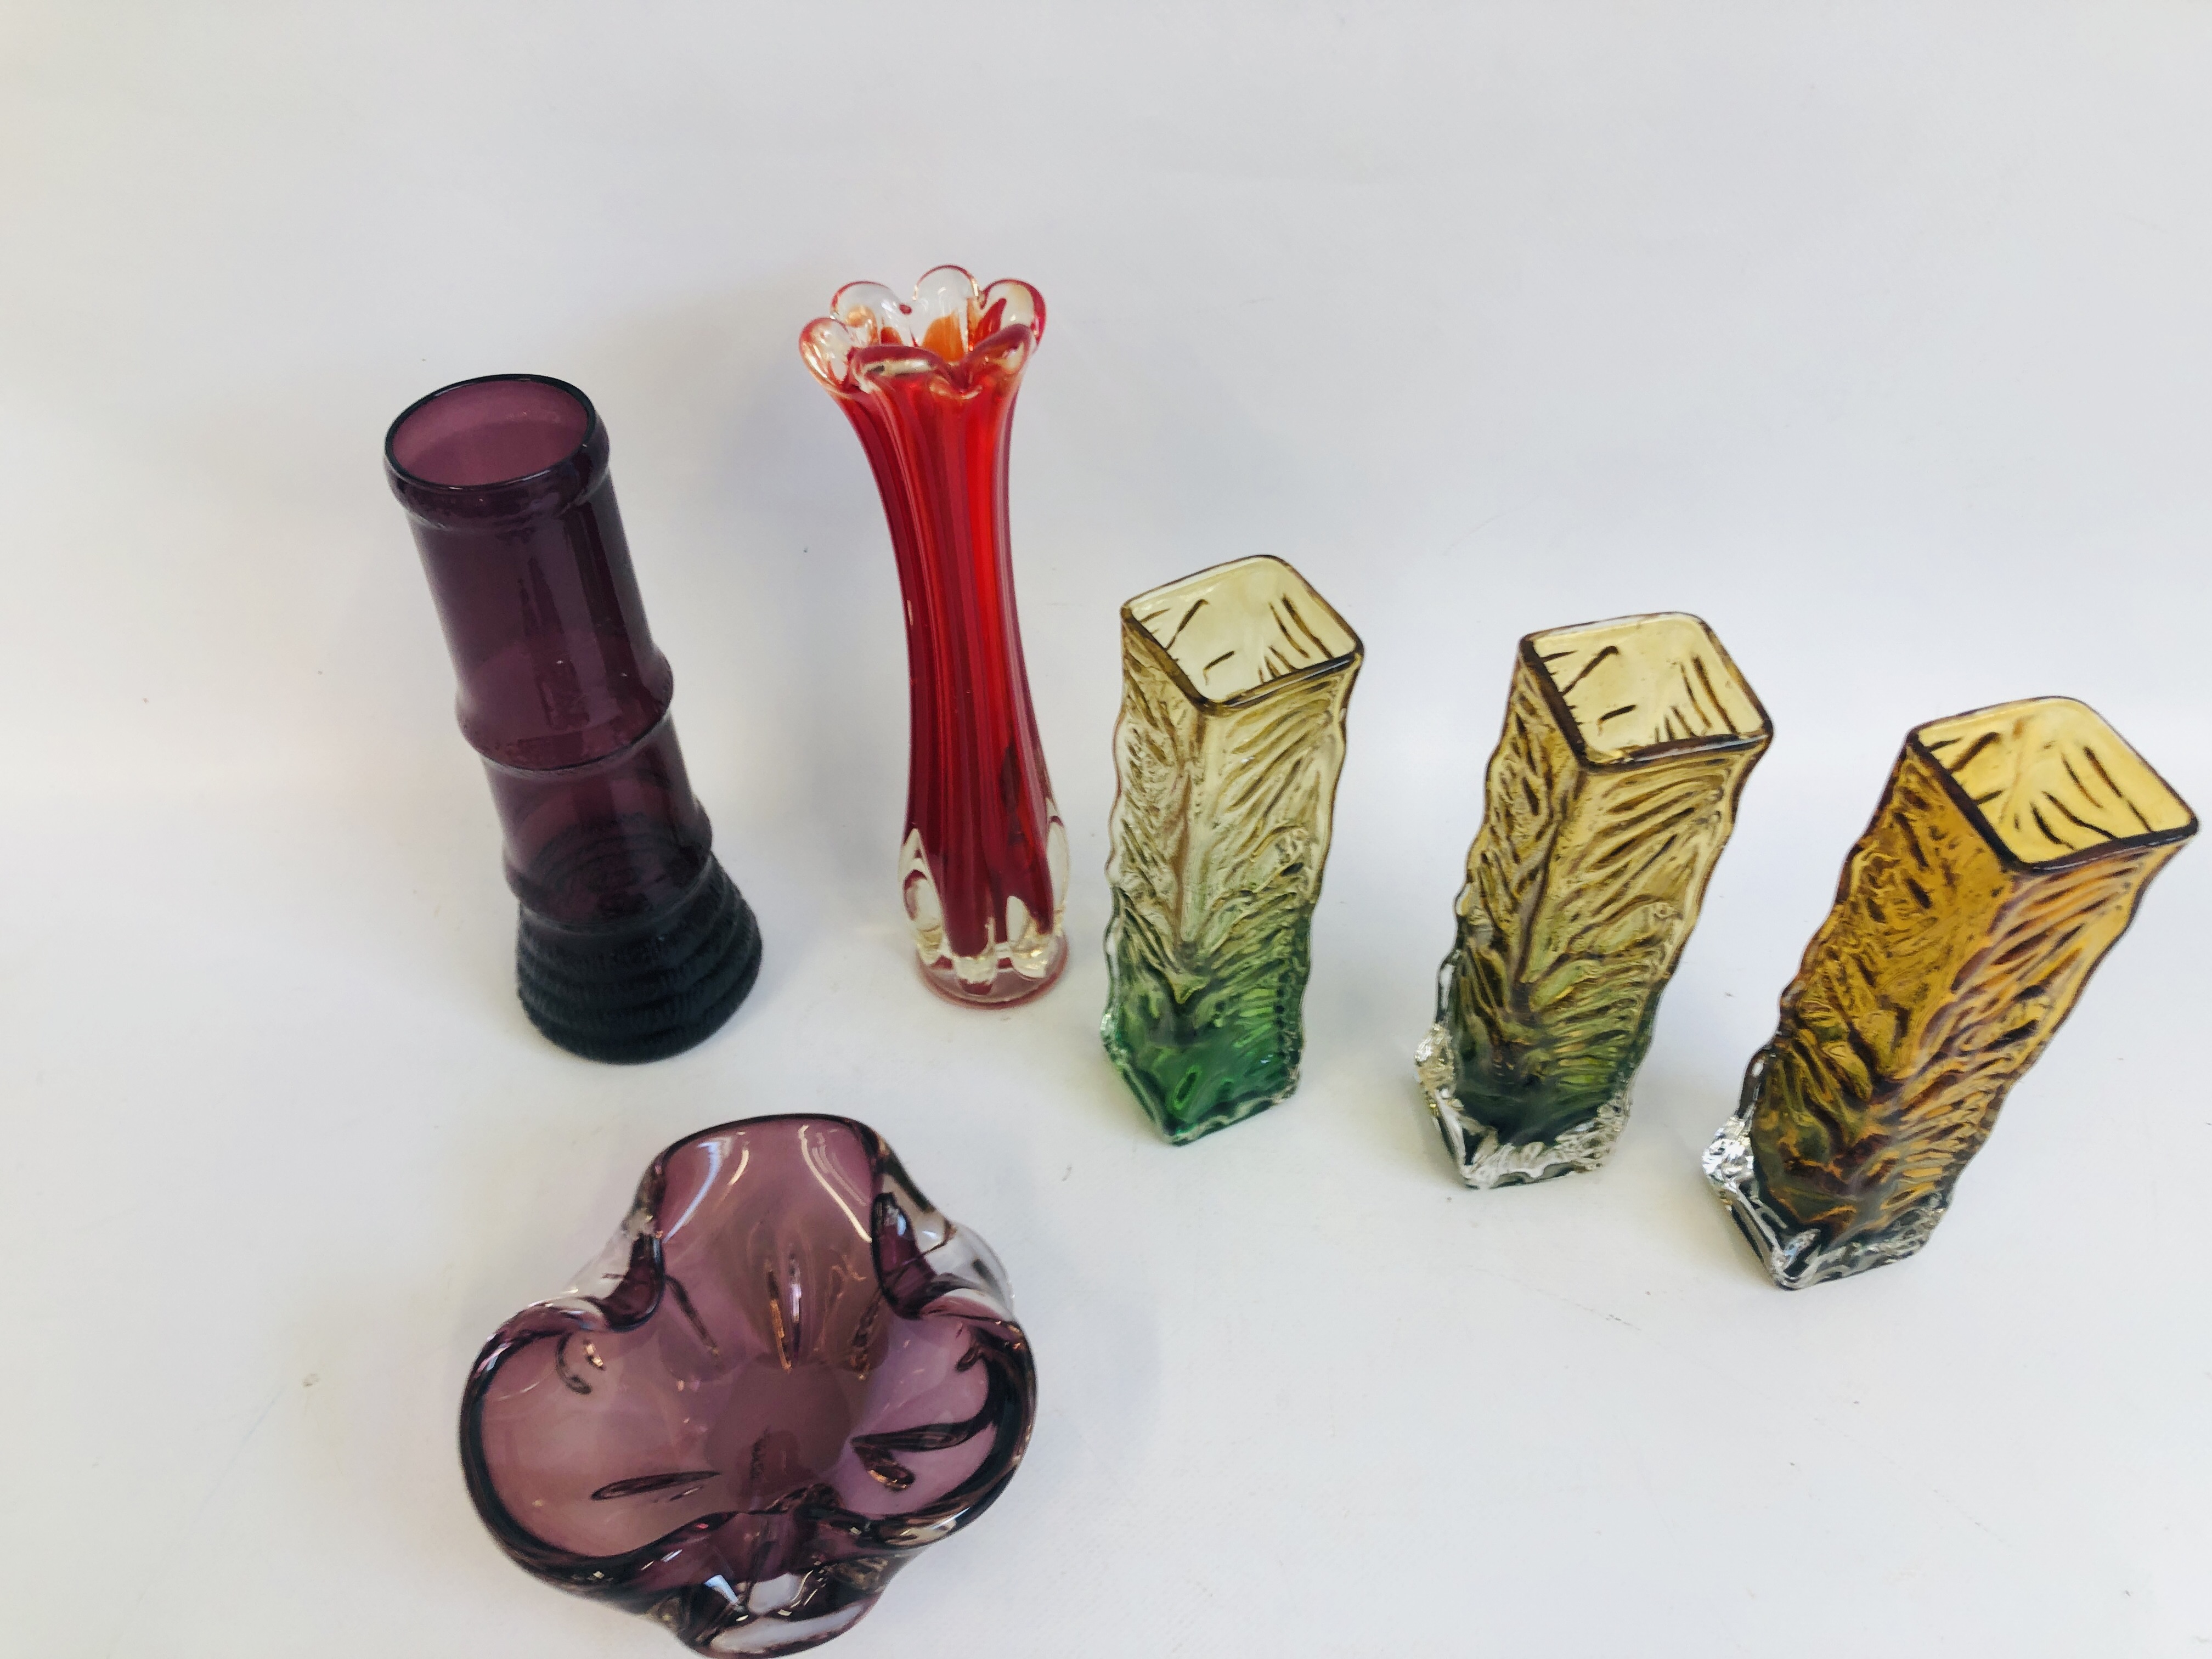 COLLECTION OF ART GLASS TO INCLUDE 3 TAGIMA STYLE VASES - Image 6 of 7